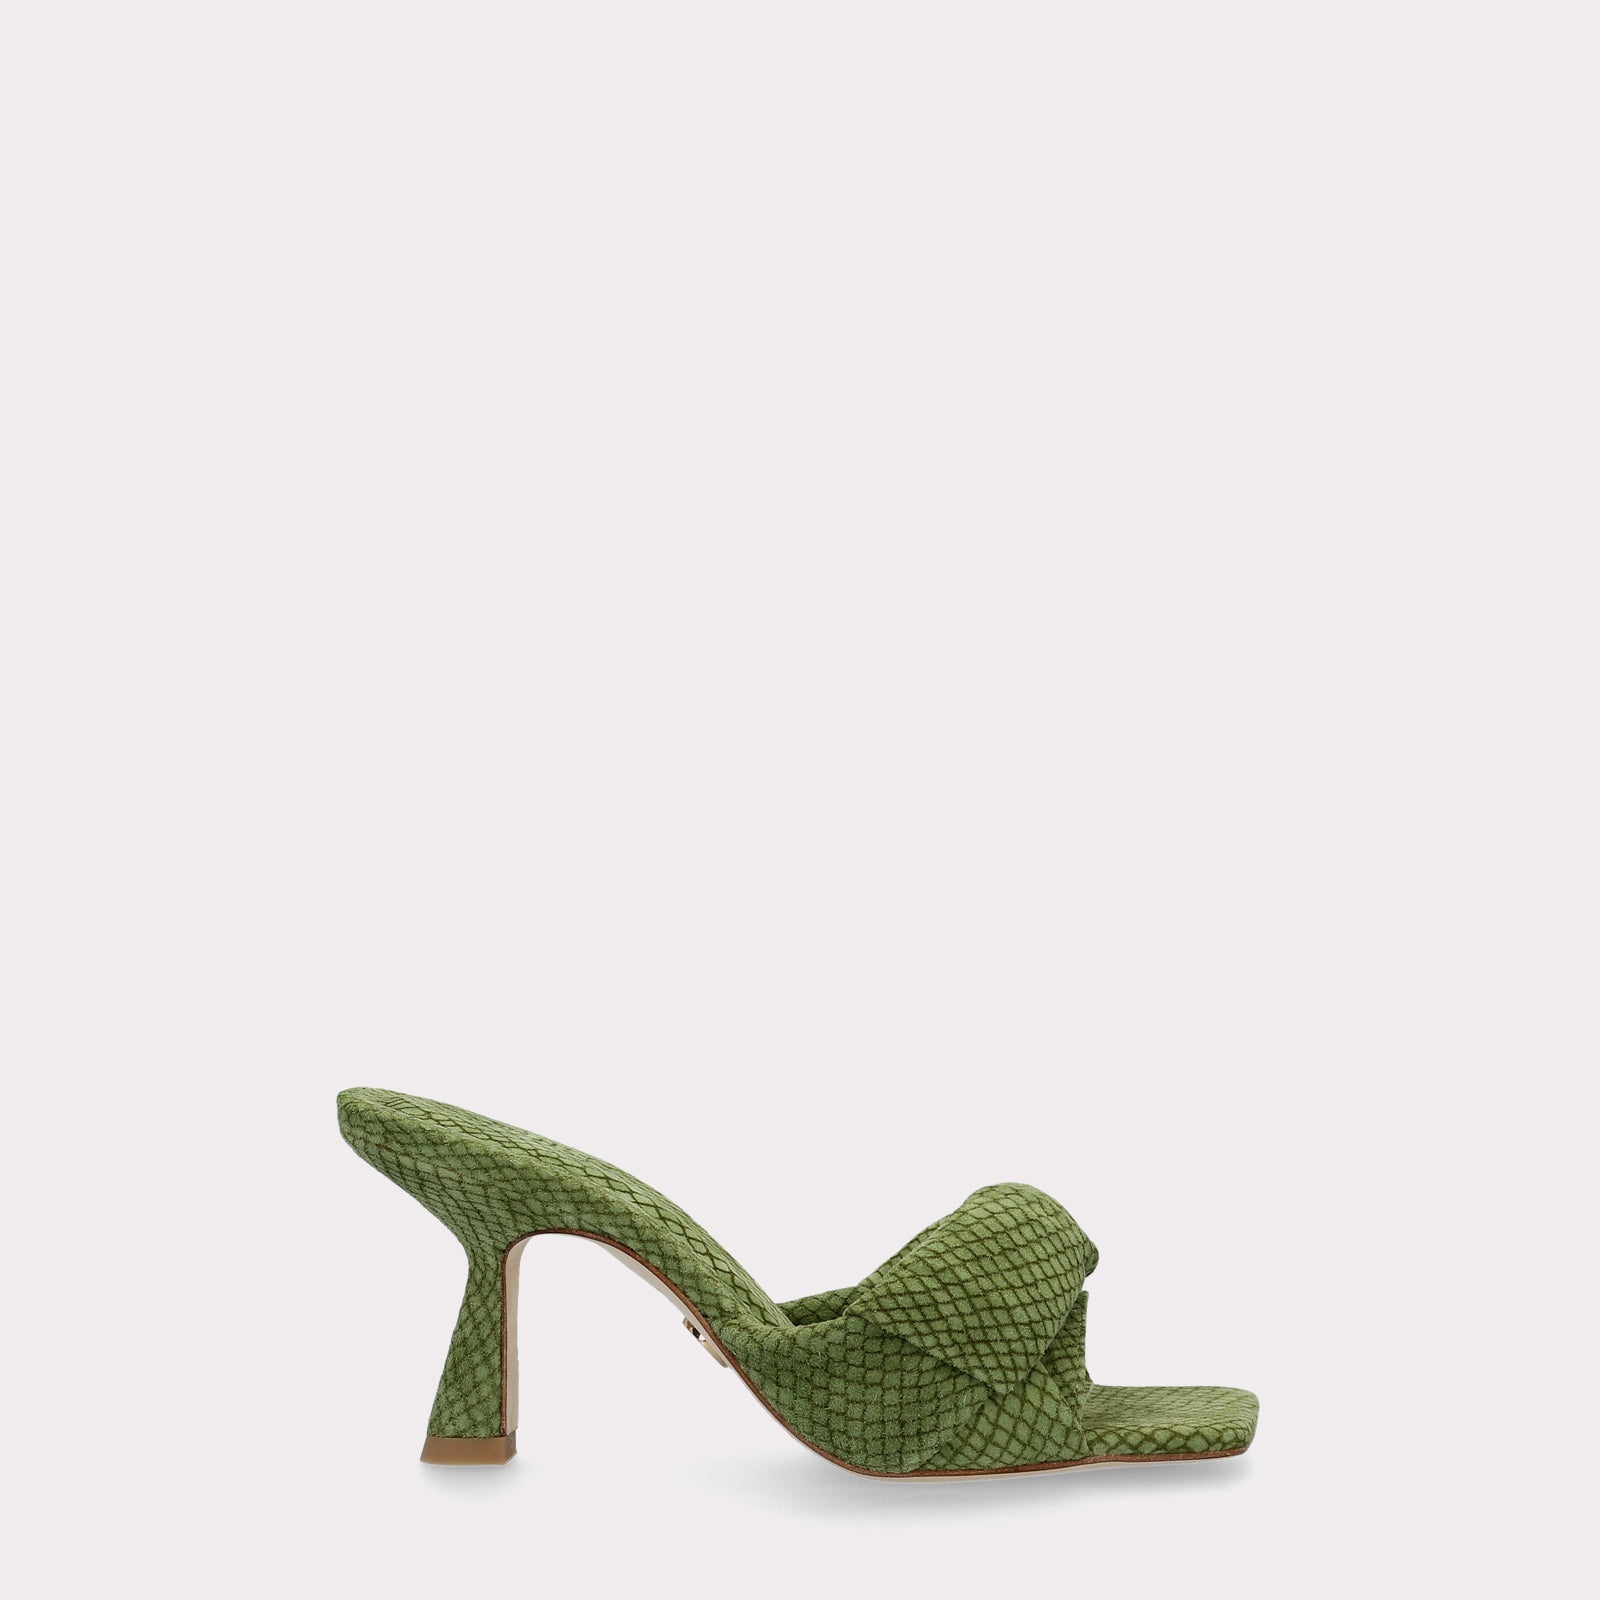 TEXTURED LEATHER MULES NIA OLIVE GREEN